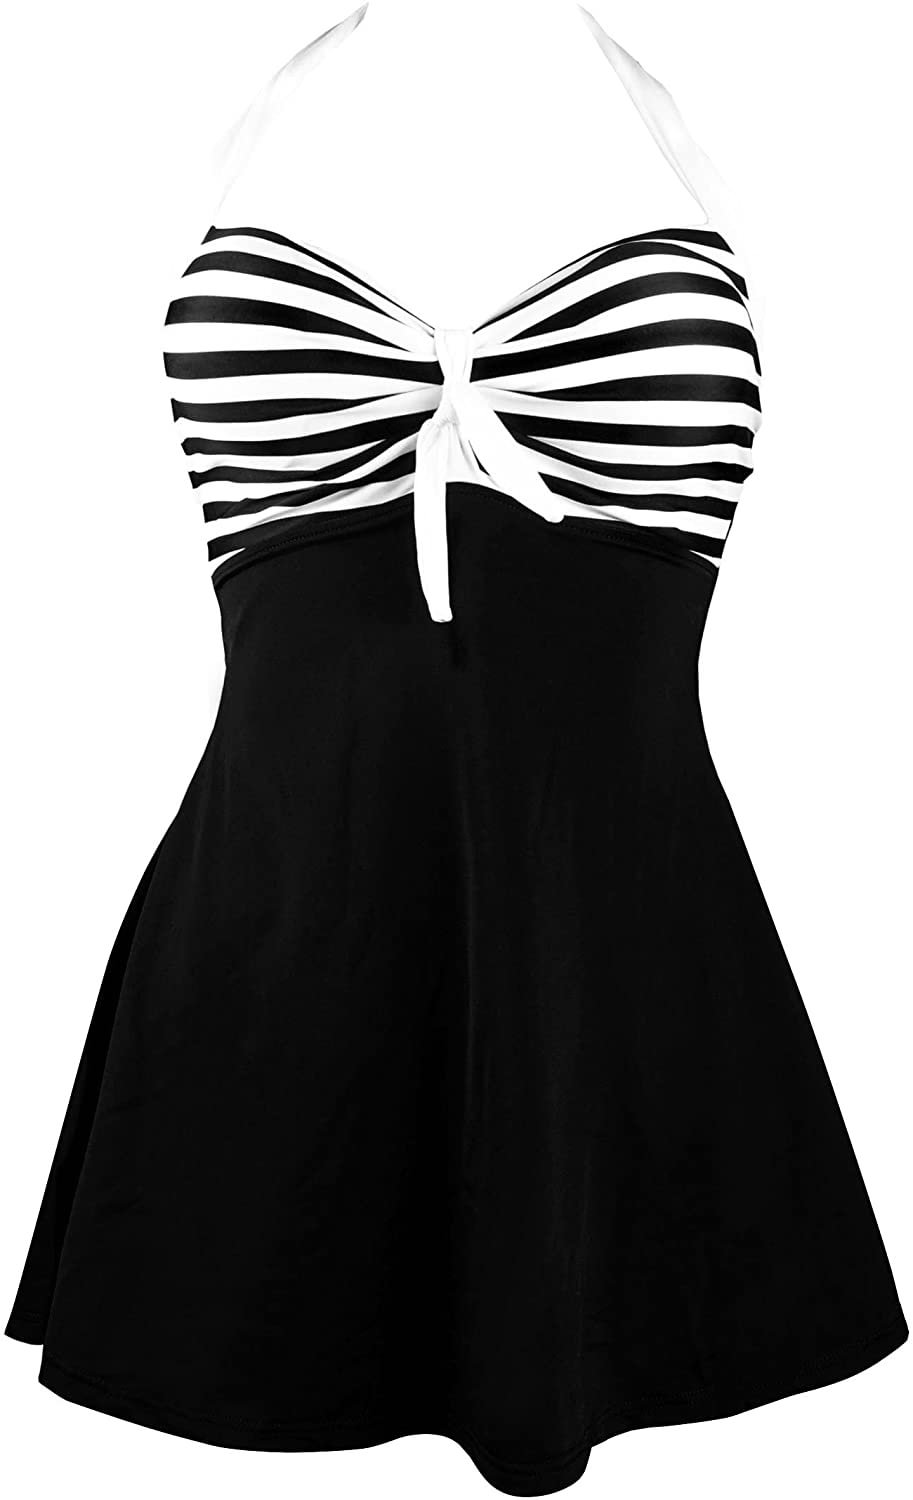 Retro One Piece Skirtini Cover Up Swimdress Vintage Sailor Pin Up Swimsuit